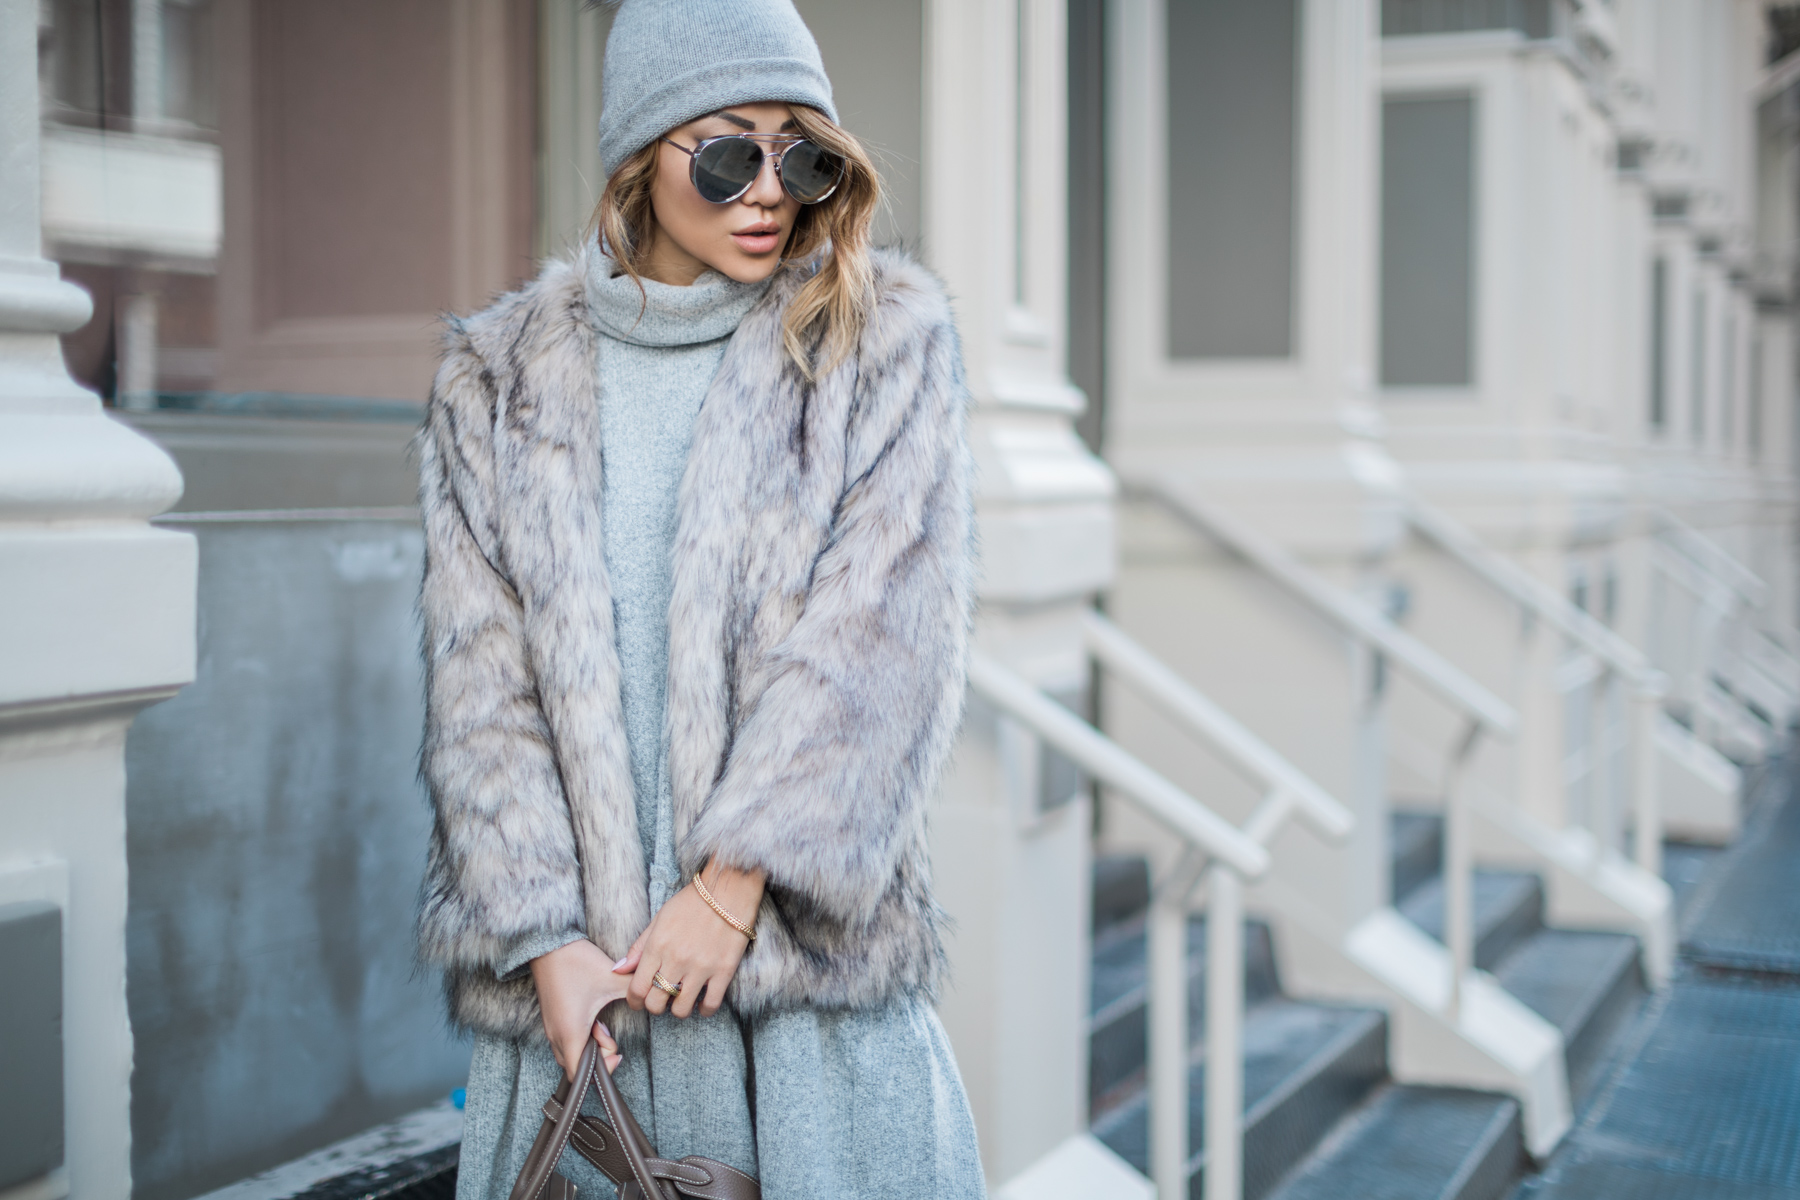 Essential Winter Coats Every Girl Should Own - Faux Fur Coat // notjessfashion.com